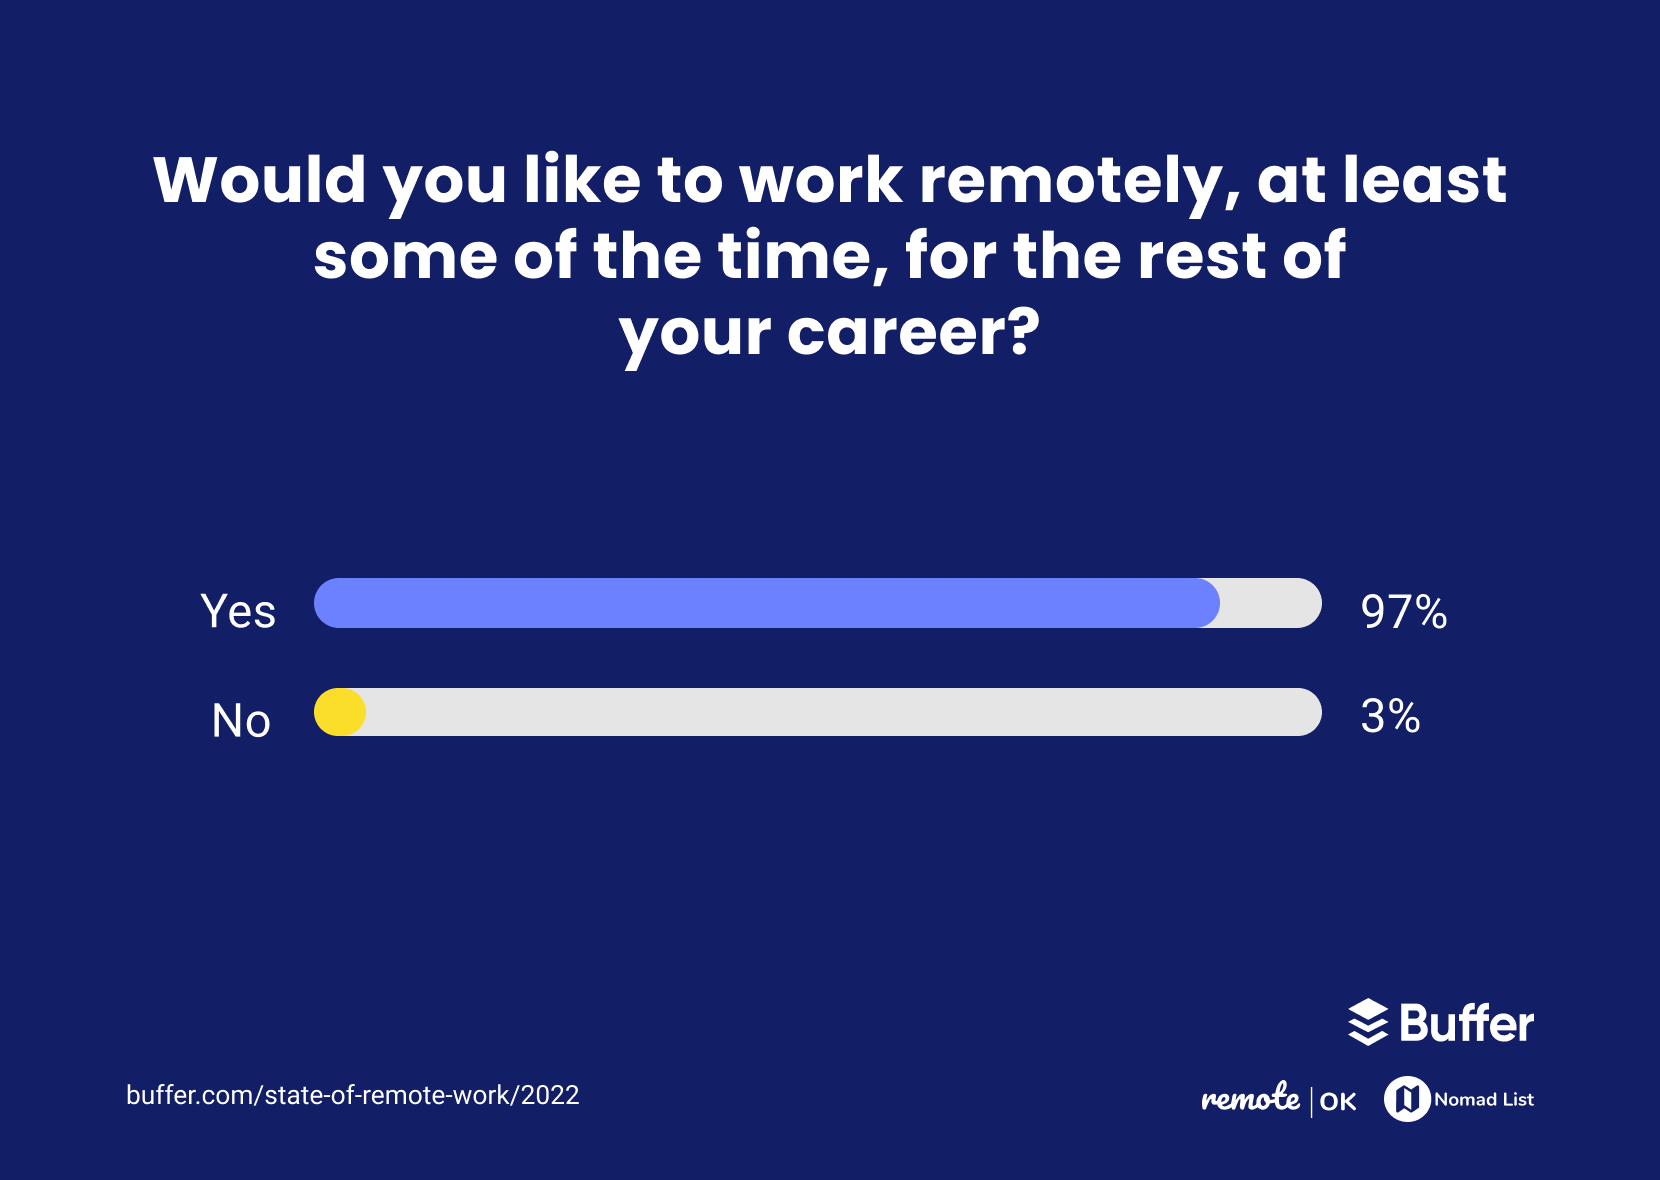 Would you like to work remotely, at least some of the time, for the rest of your career?